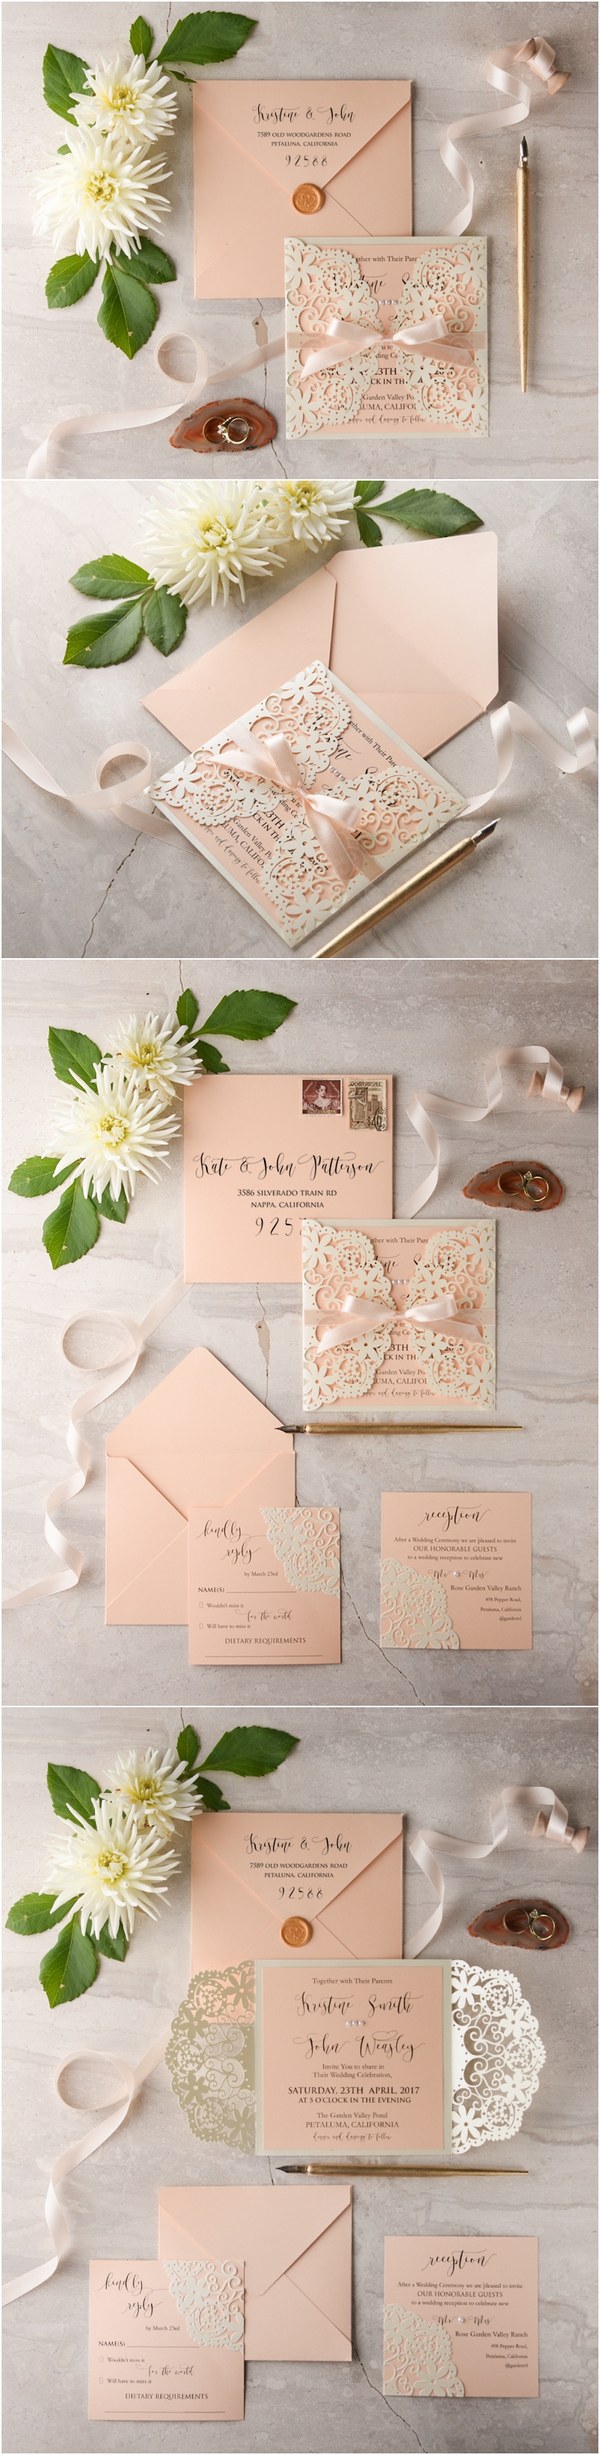 Peach and Ivory laser cut wedding invitations 11LuctGGz